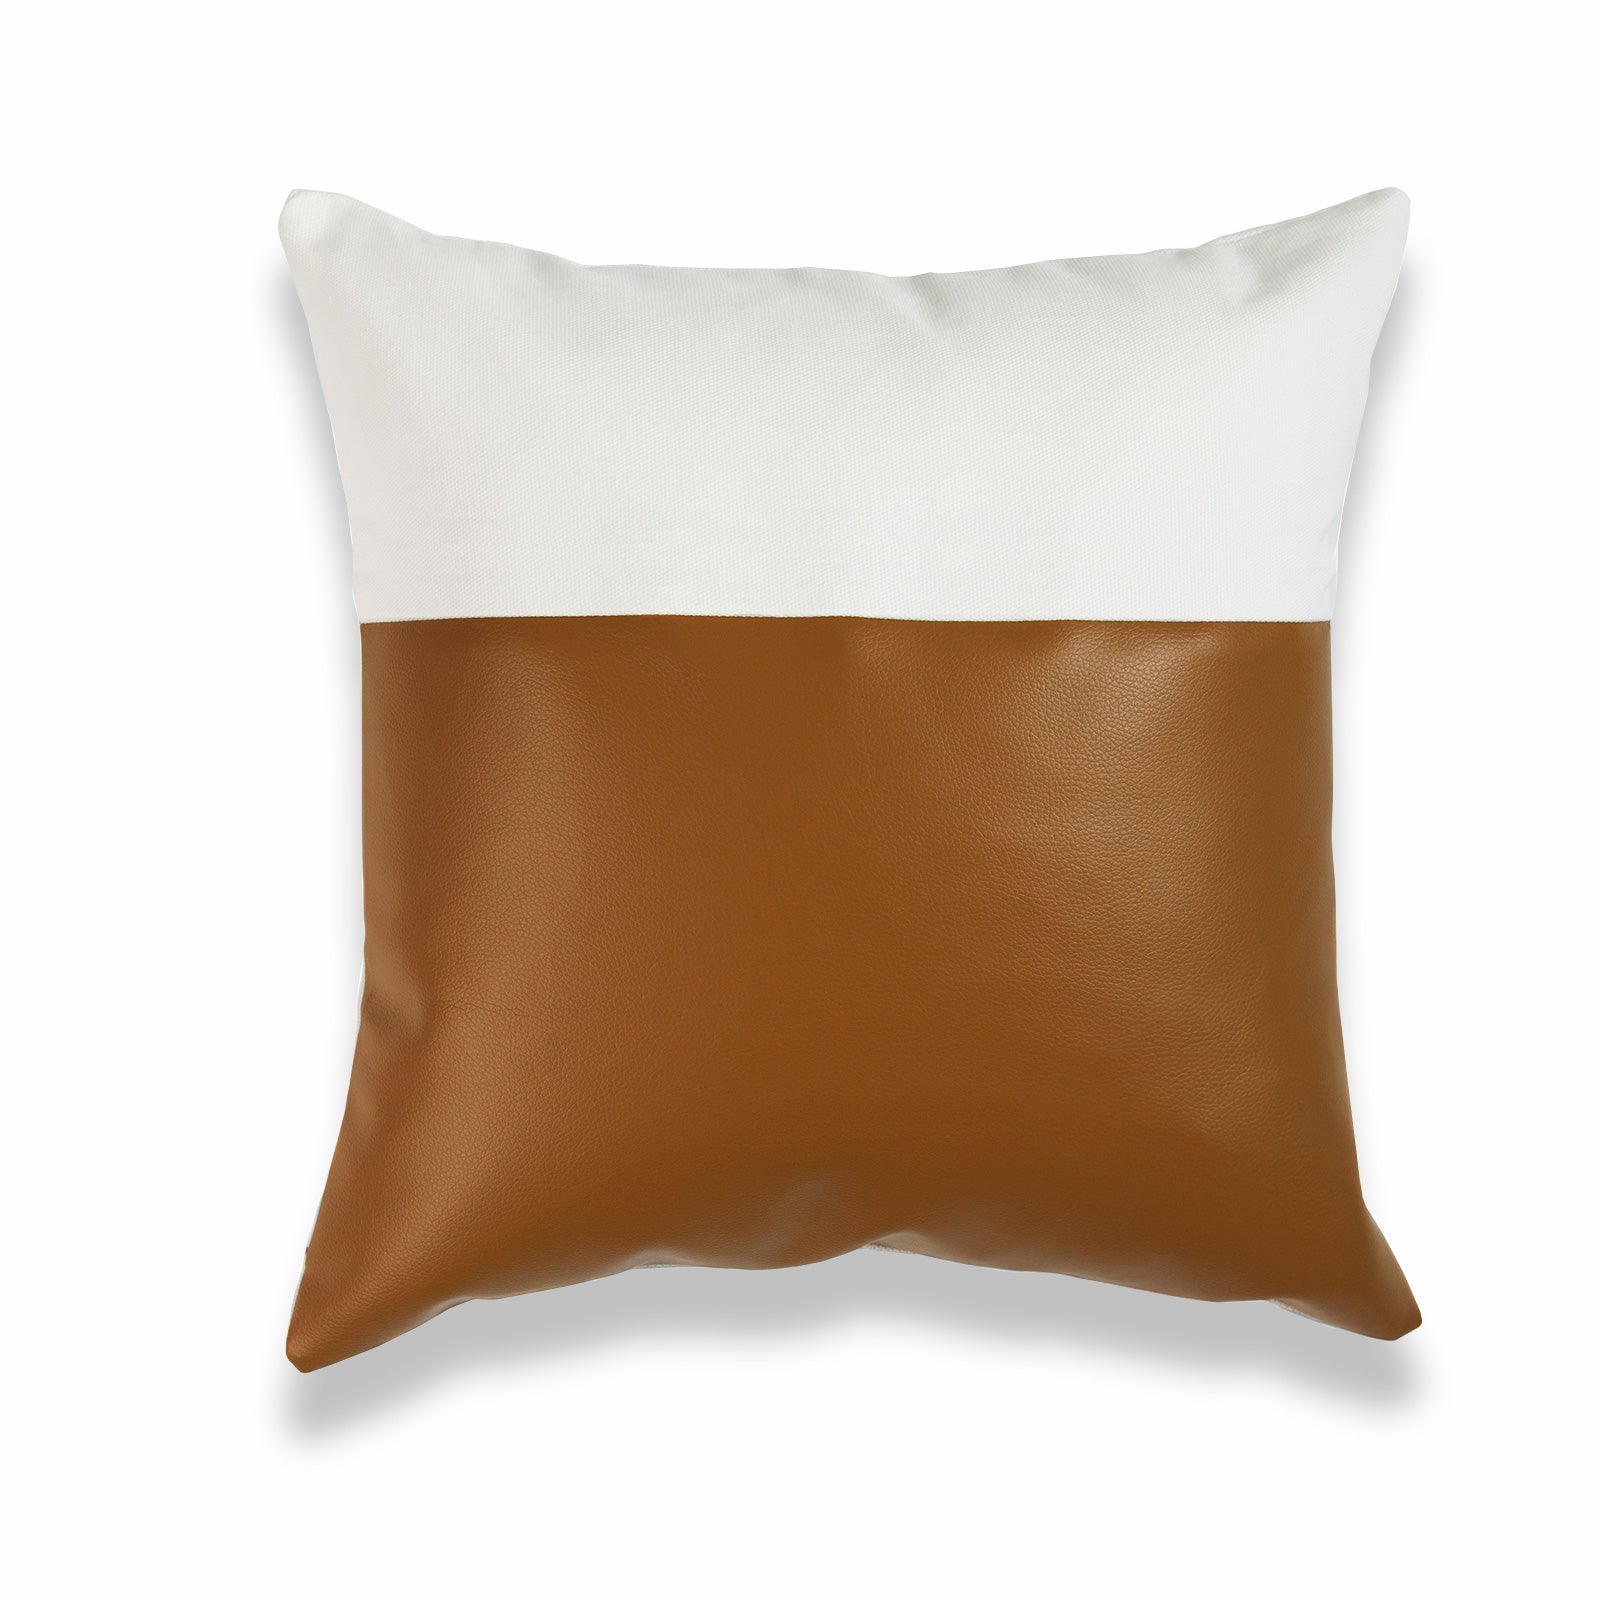 Faux Leather Pillow Cover, Modern Design, Camel White, 18"x18"-0